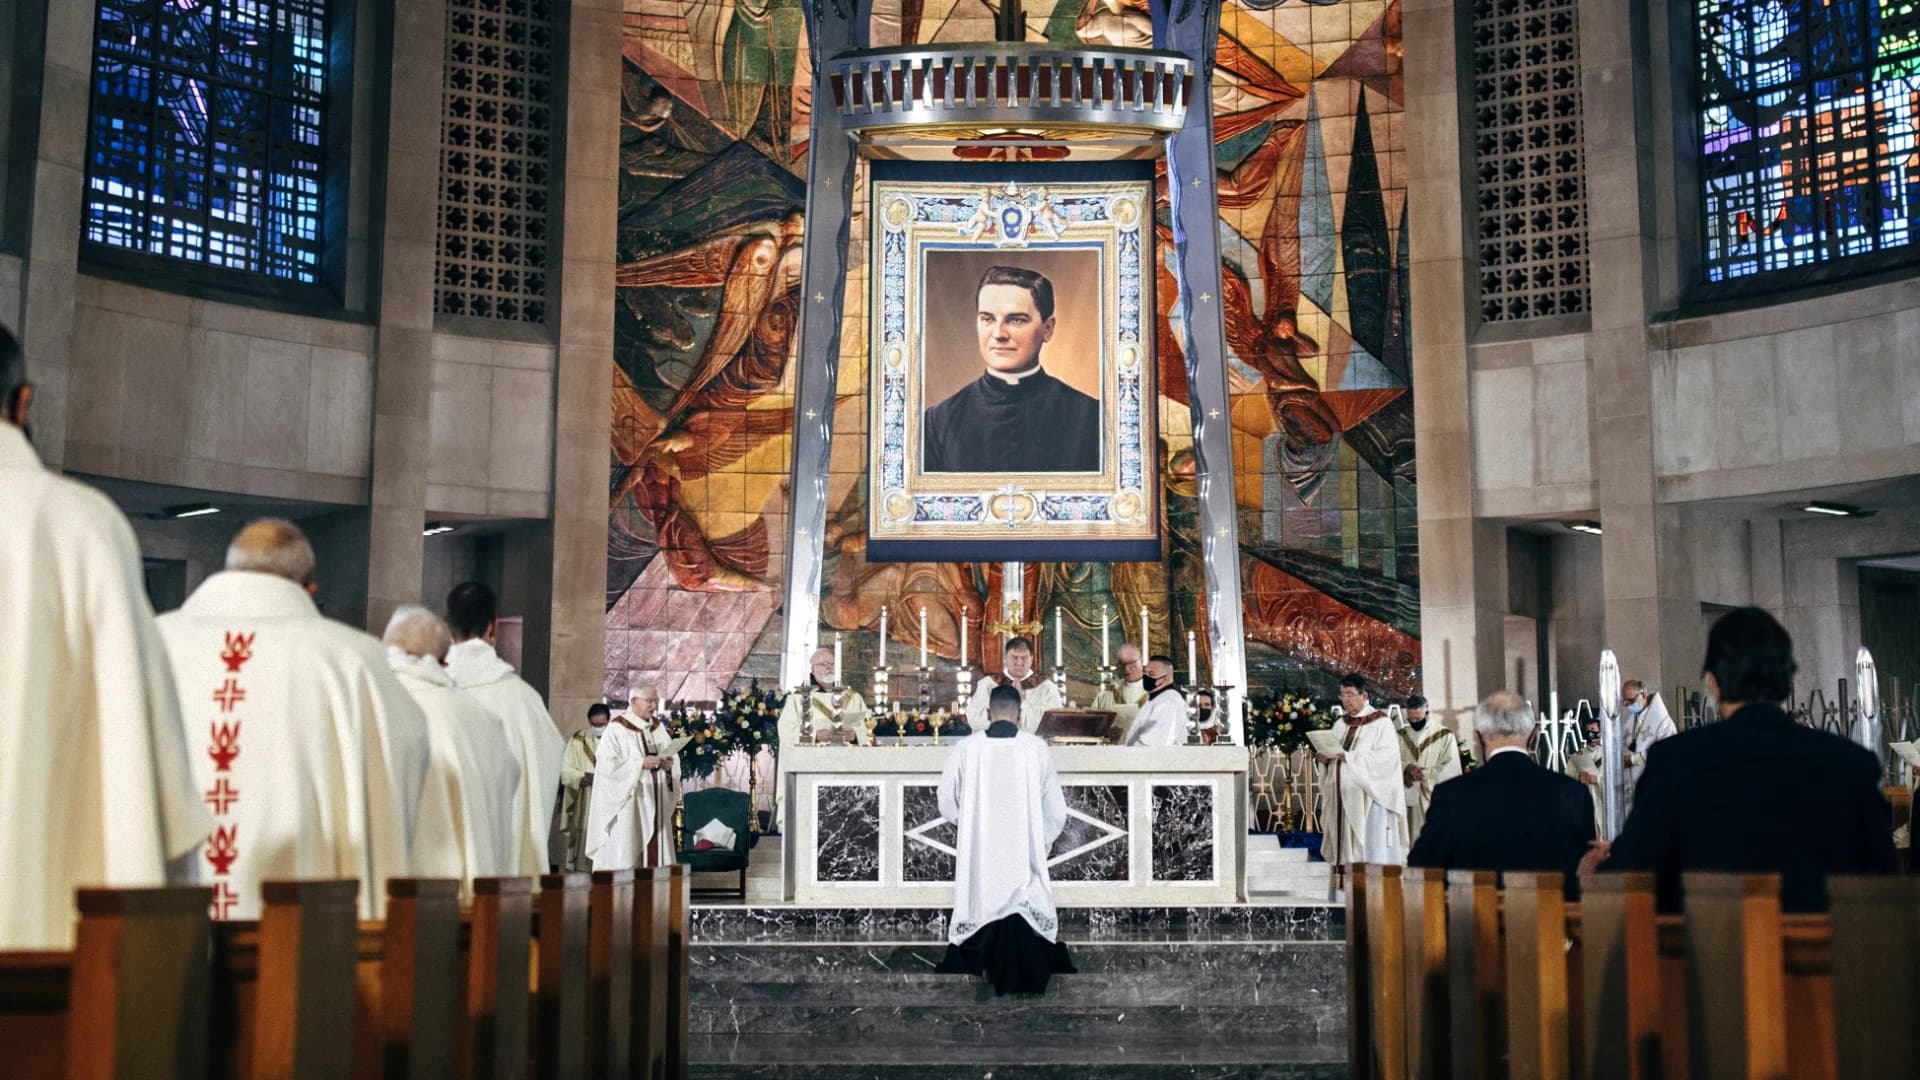 CT priest who founded Knights of Columbus is beatified